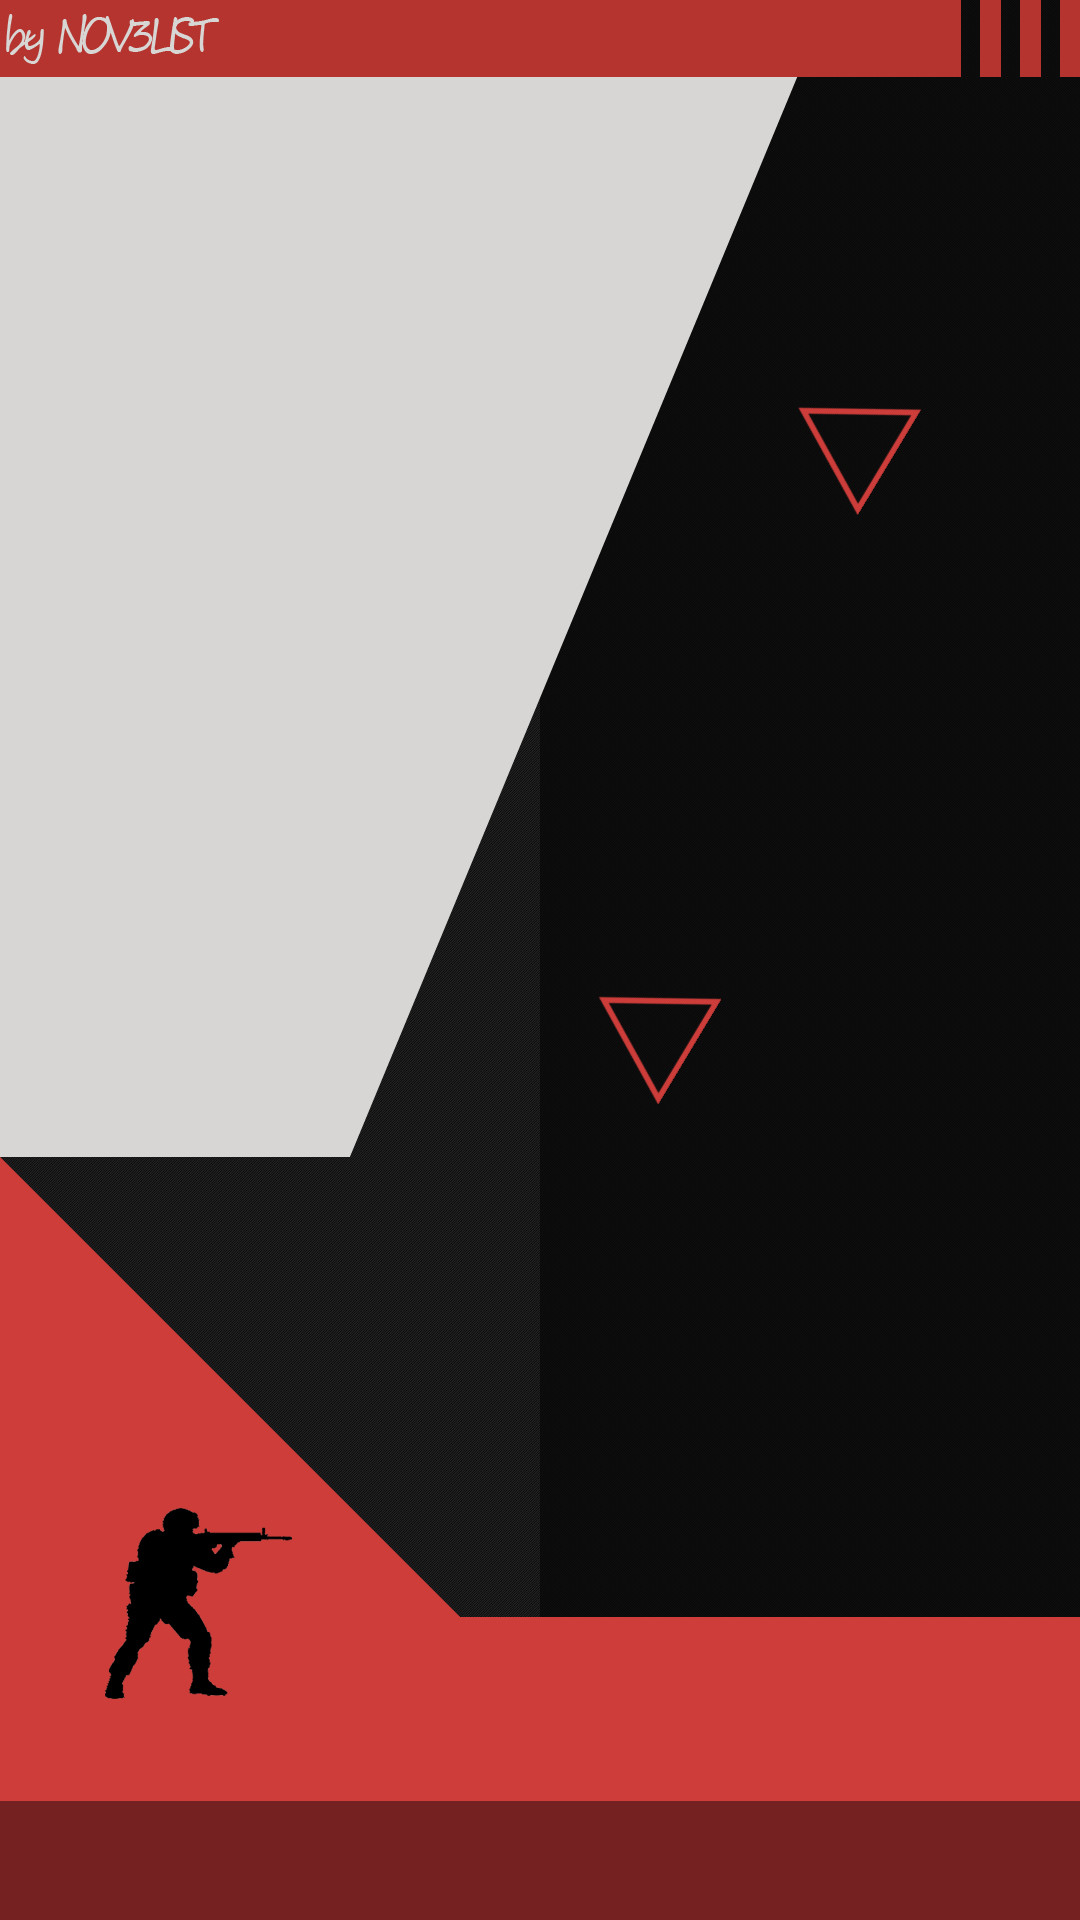 UGCI made an "Cyrex" themed Smartphone Wallpaper! (1080x1920px) What do you  think?